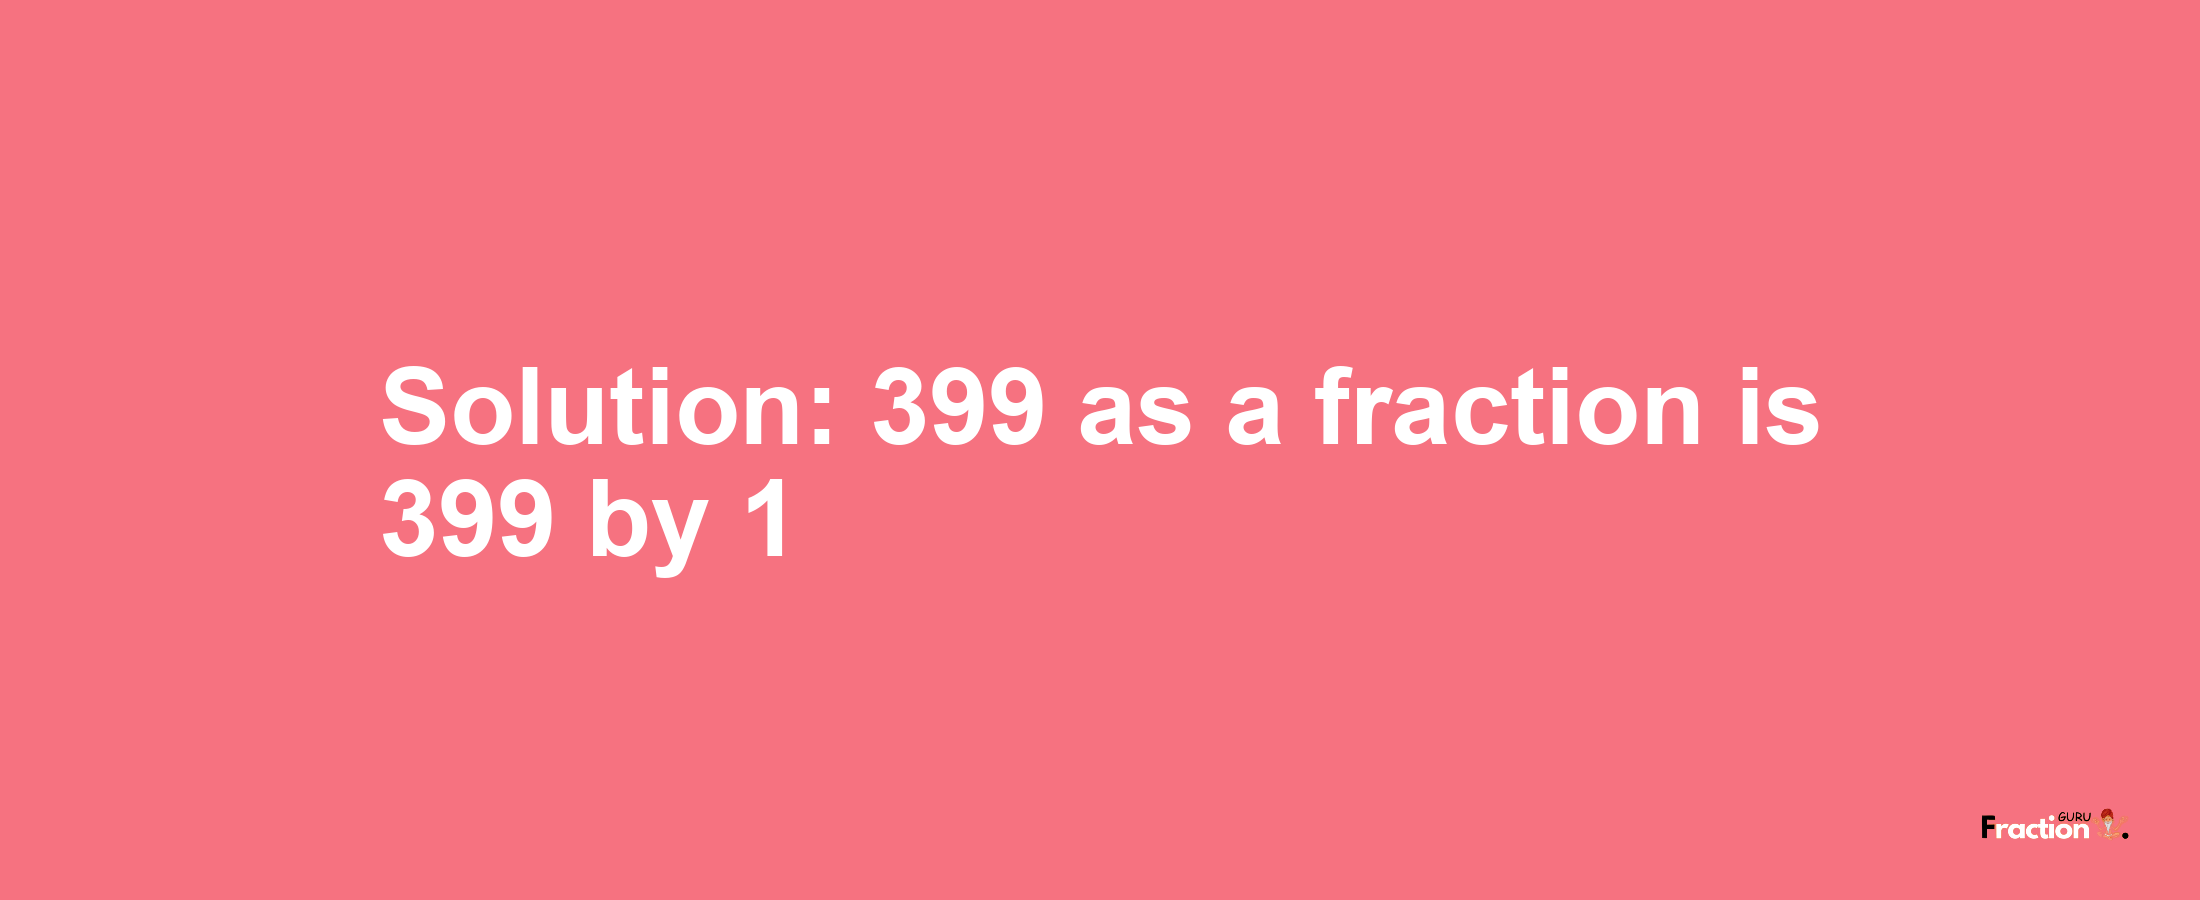 Solution:399 as a fraction is 399/1